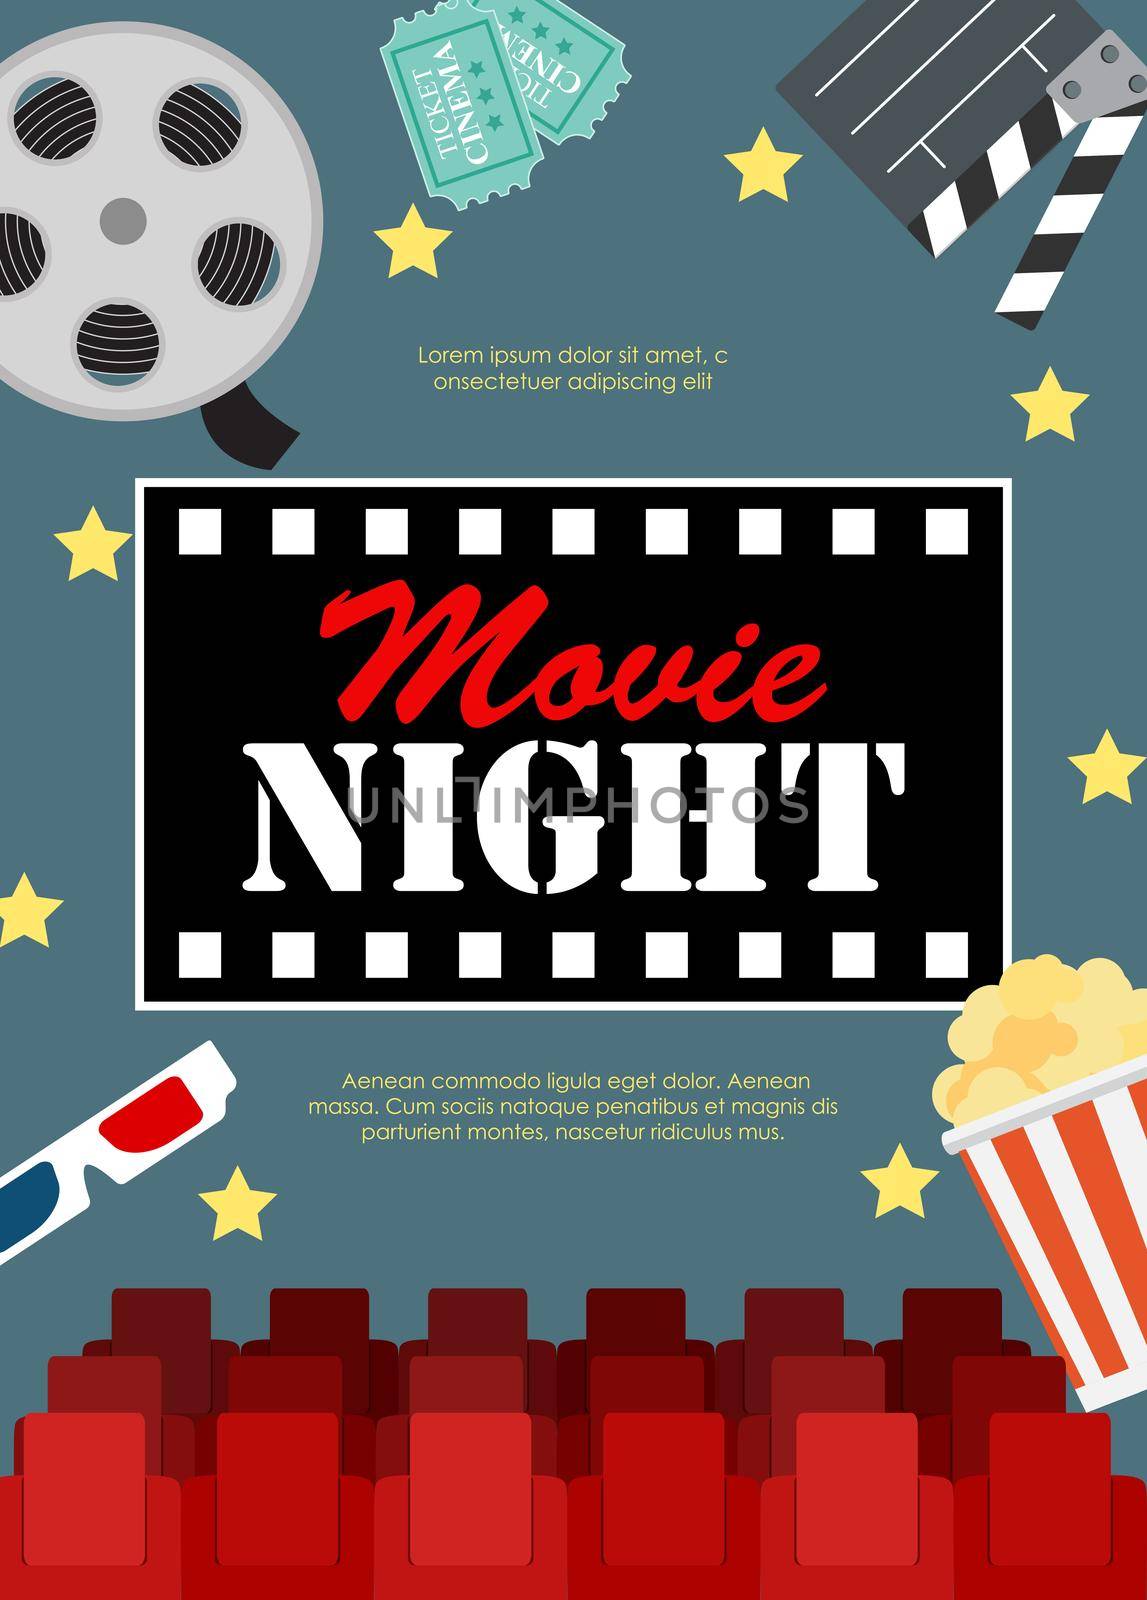 Abstract Movie Night Cinema Flat Background with Reel, Old Style Ticket, Big Pop Corn and Clapper Symbol Icons. Vector Illustration EPS10